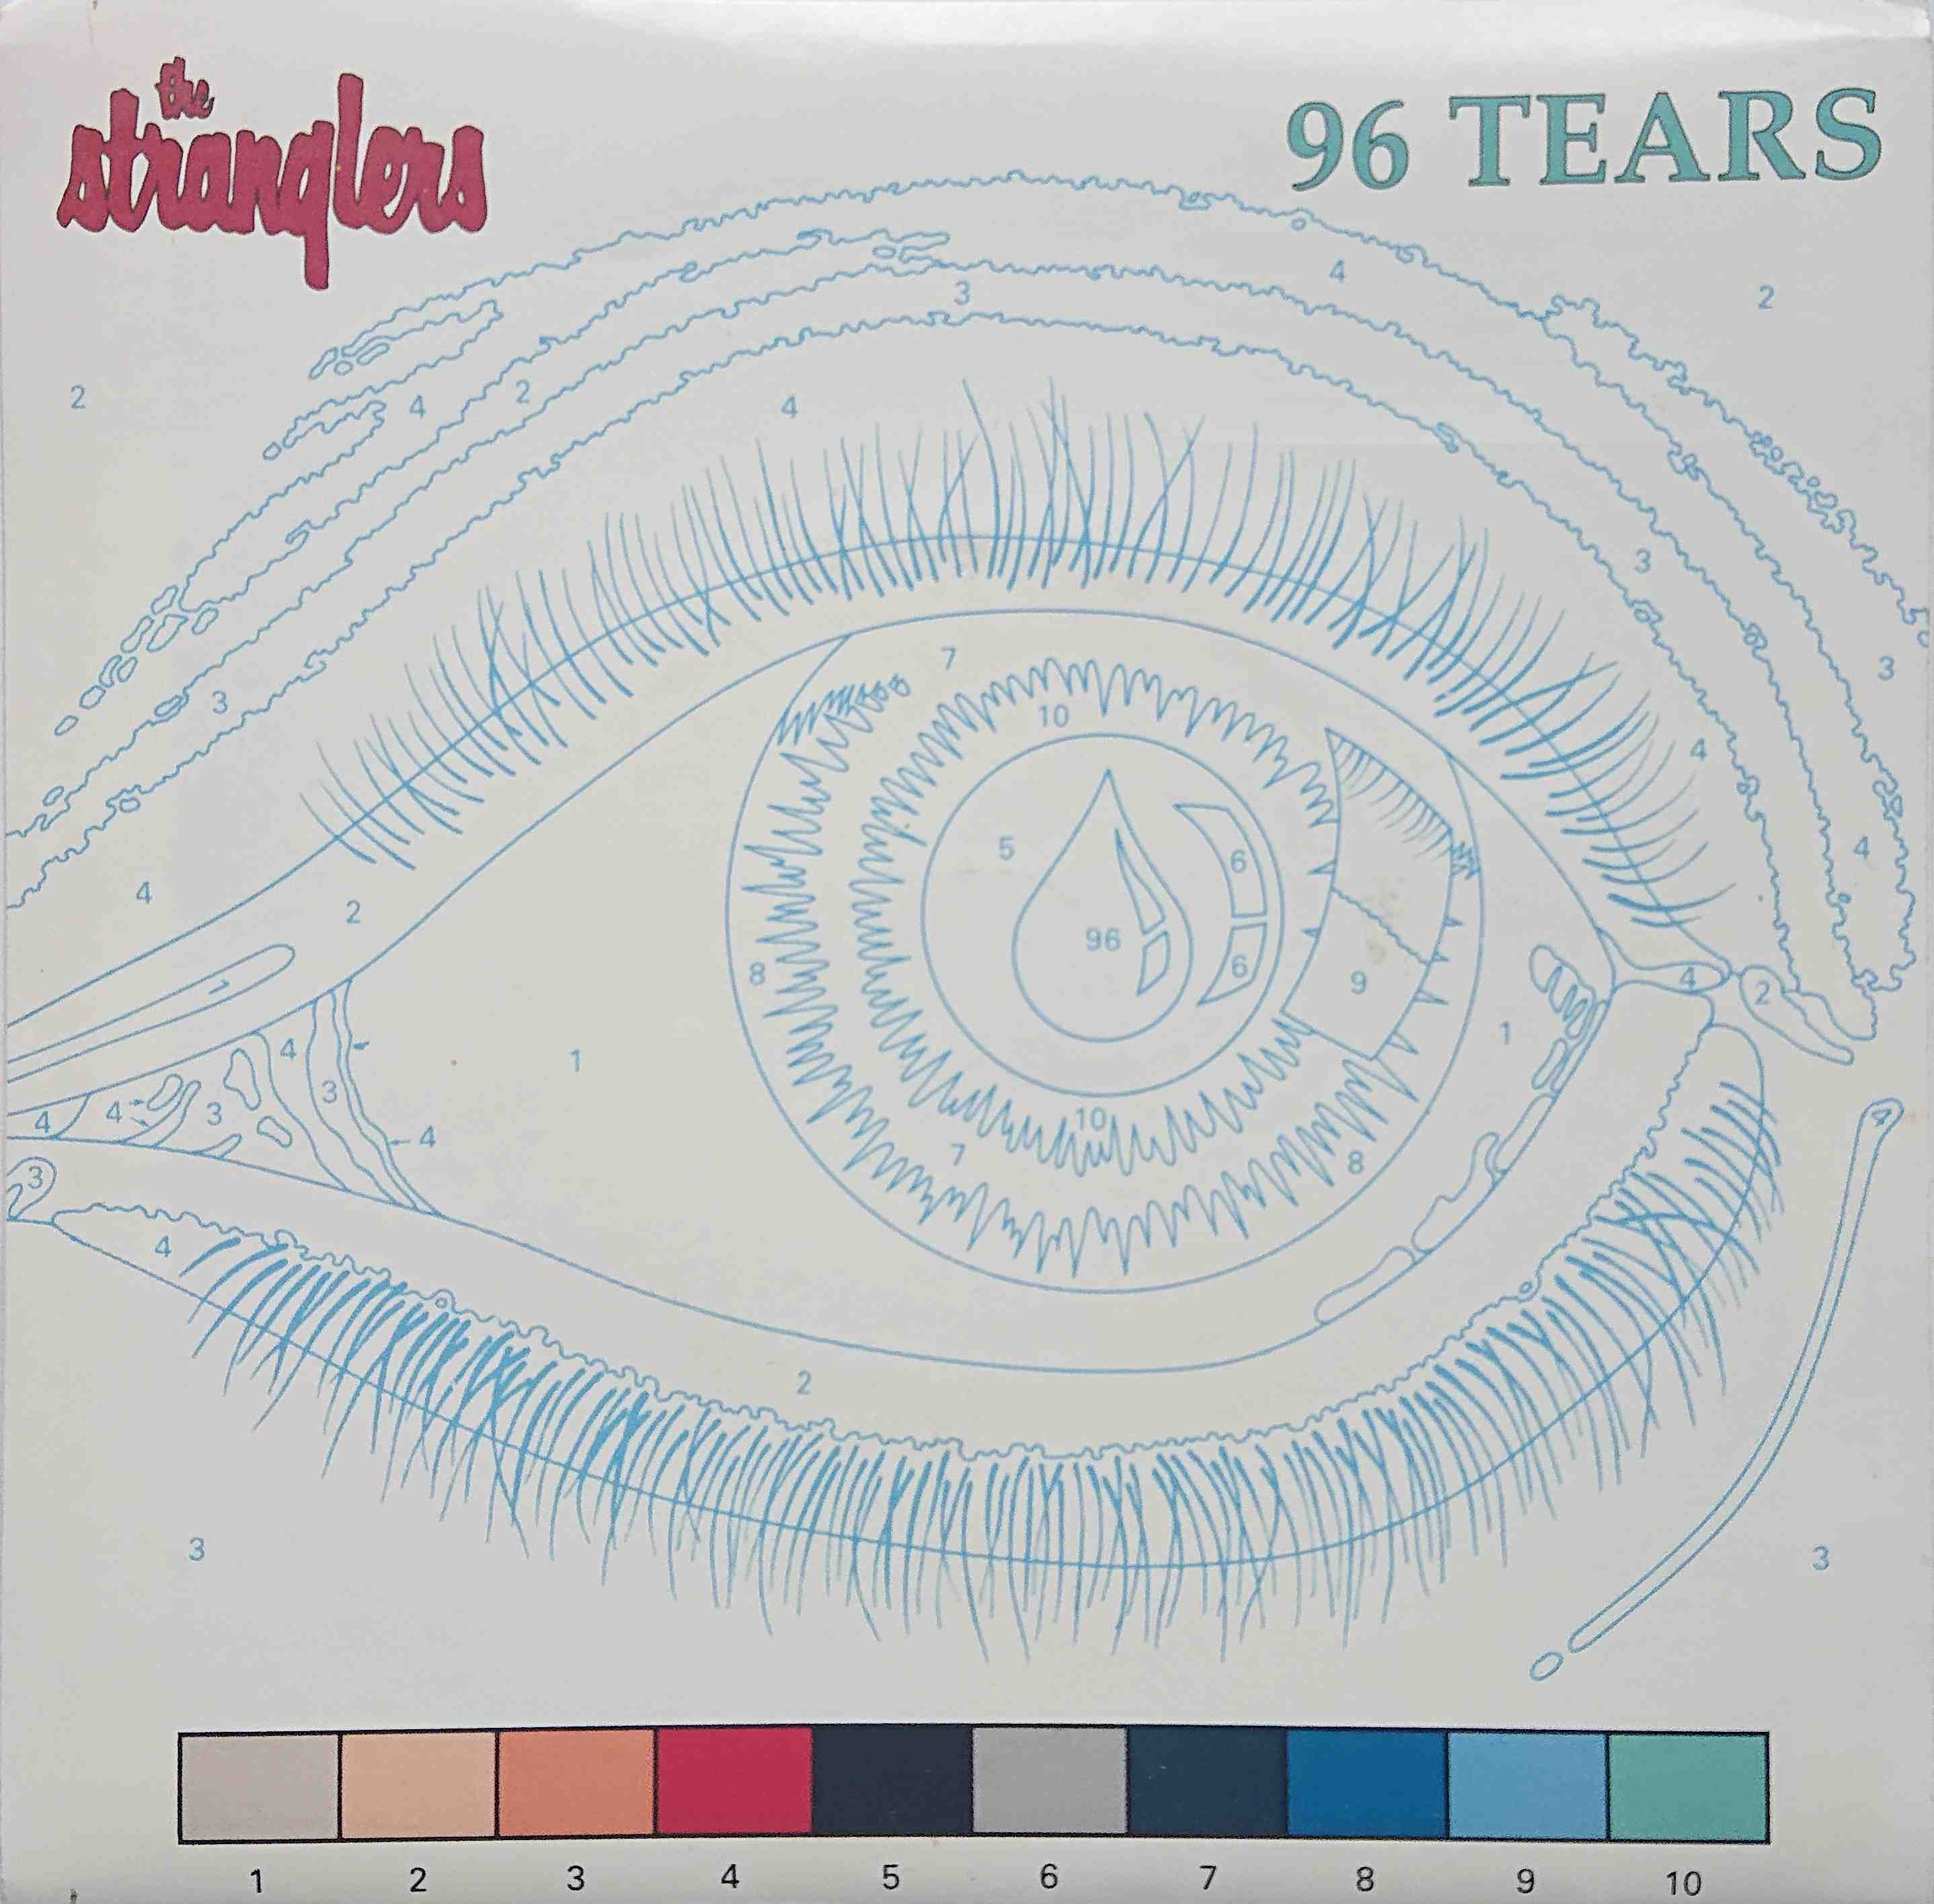 Picture of 96 tears by artist The Stranglers from The Stranglers singles